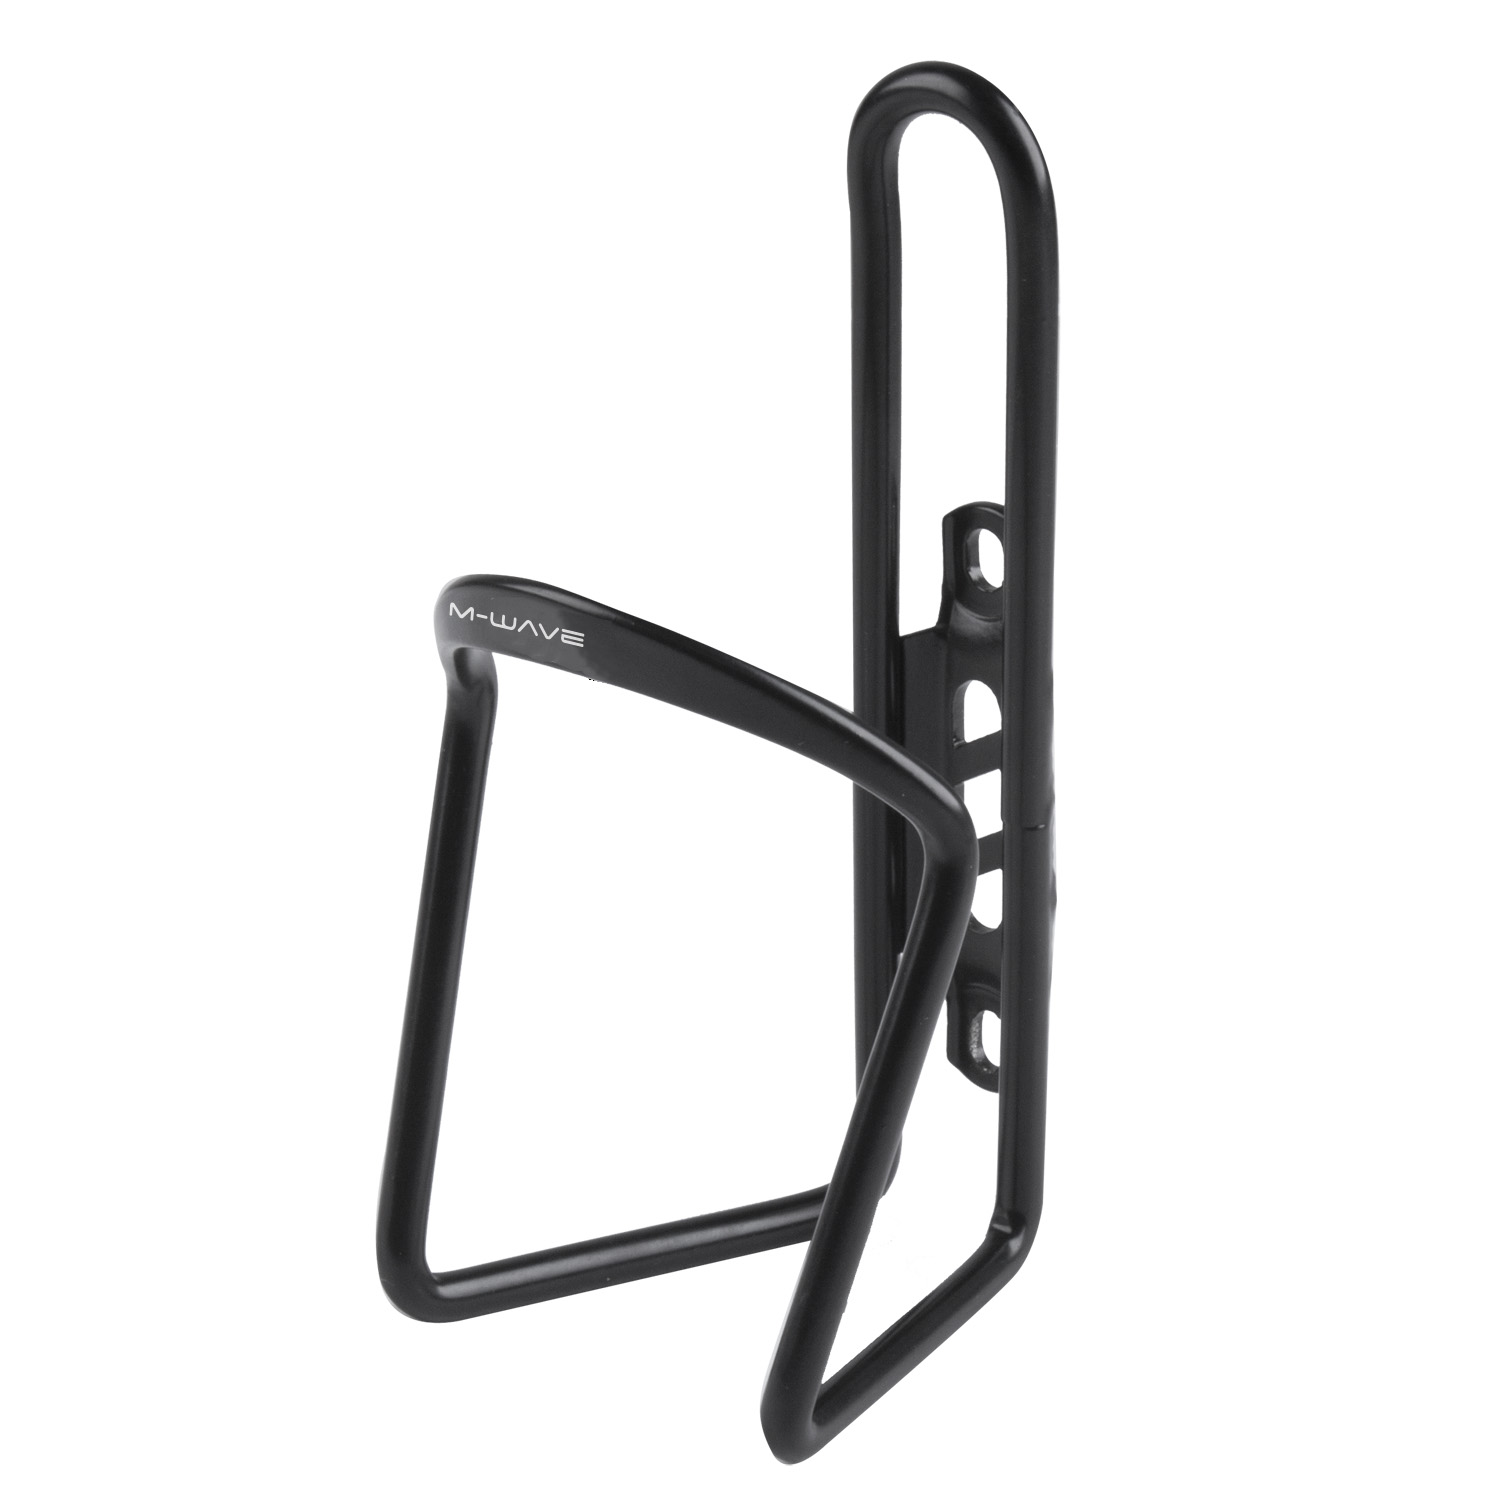 M-WAVE C bottle cage – AVAILABLE IN SELECTED BIKE SHOPS